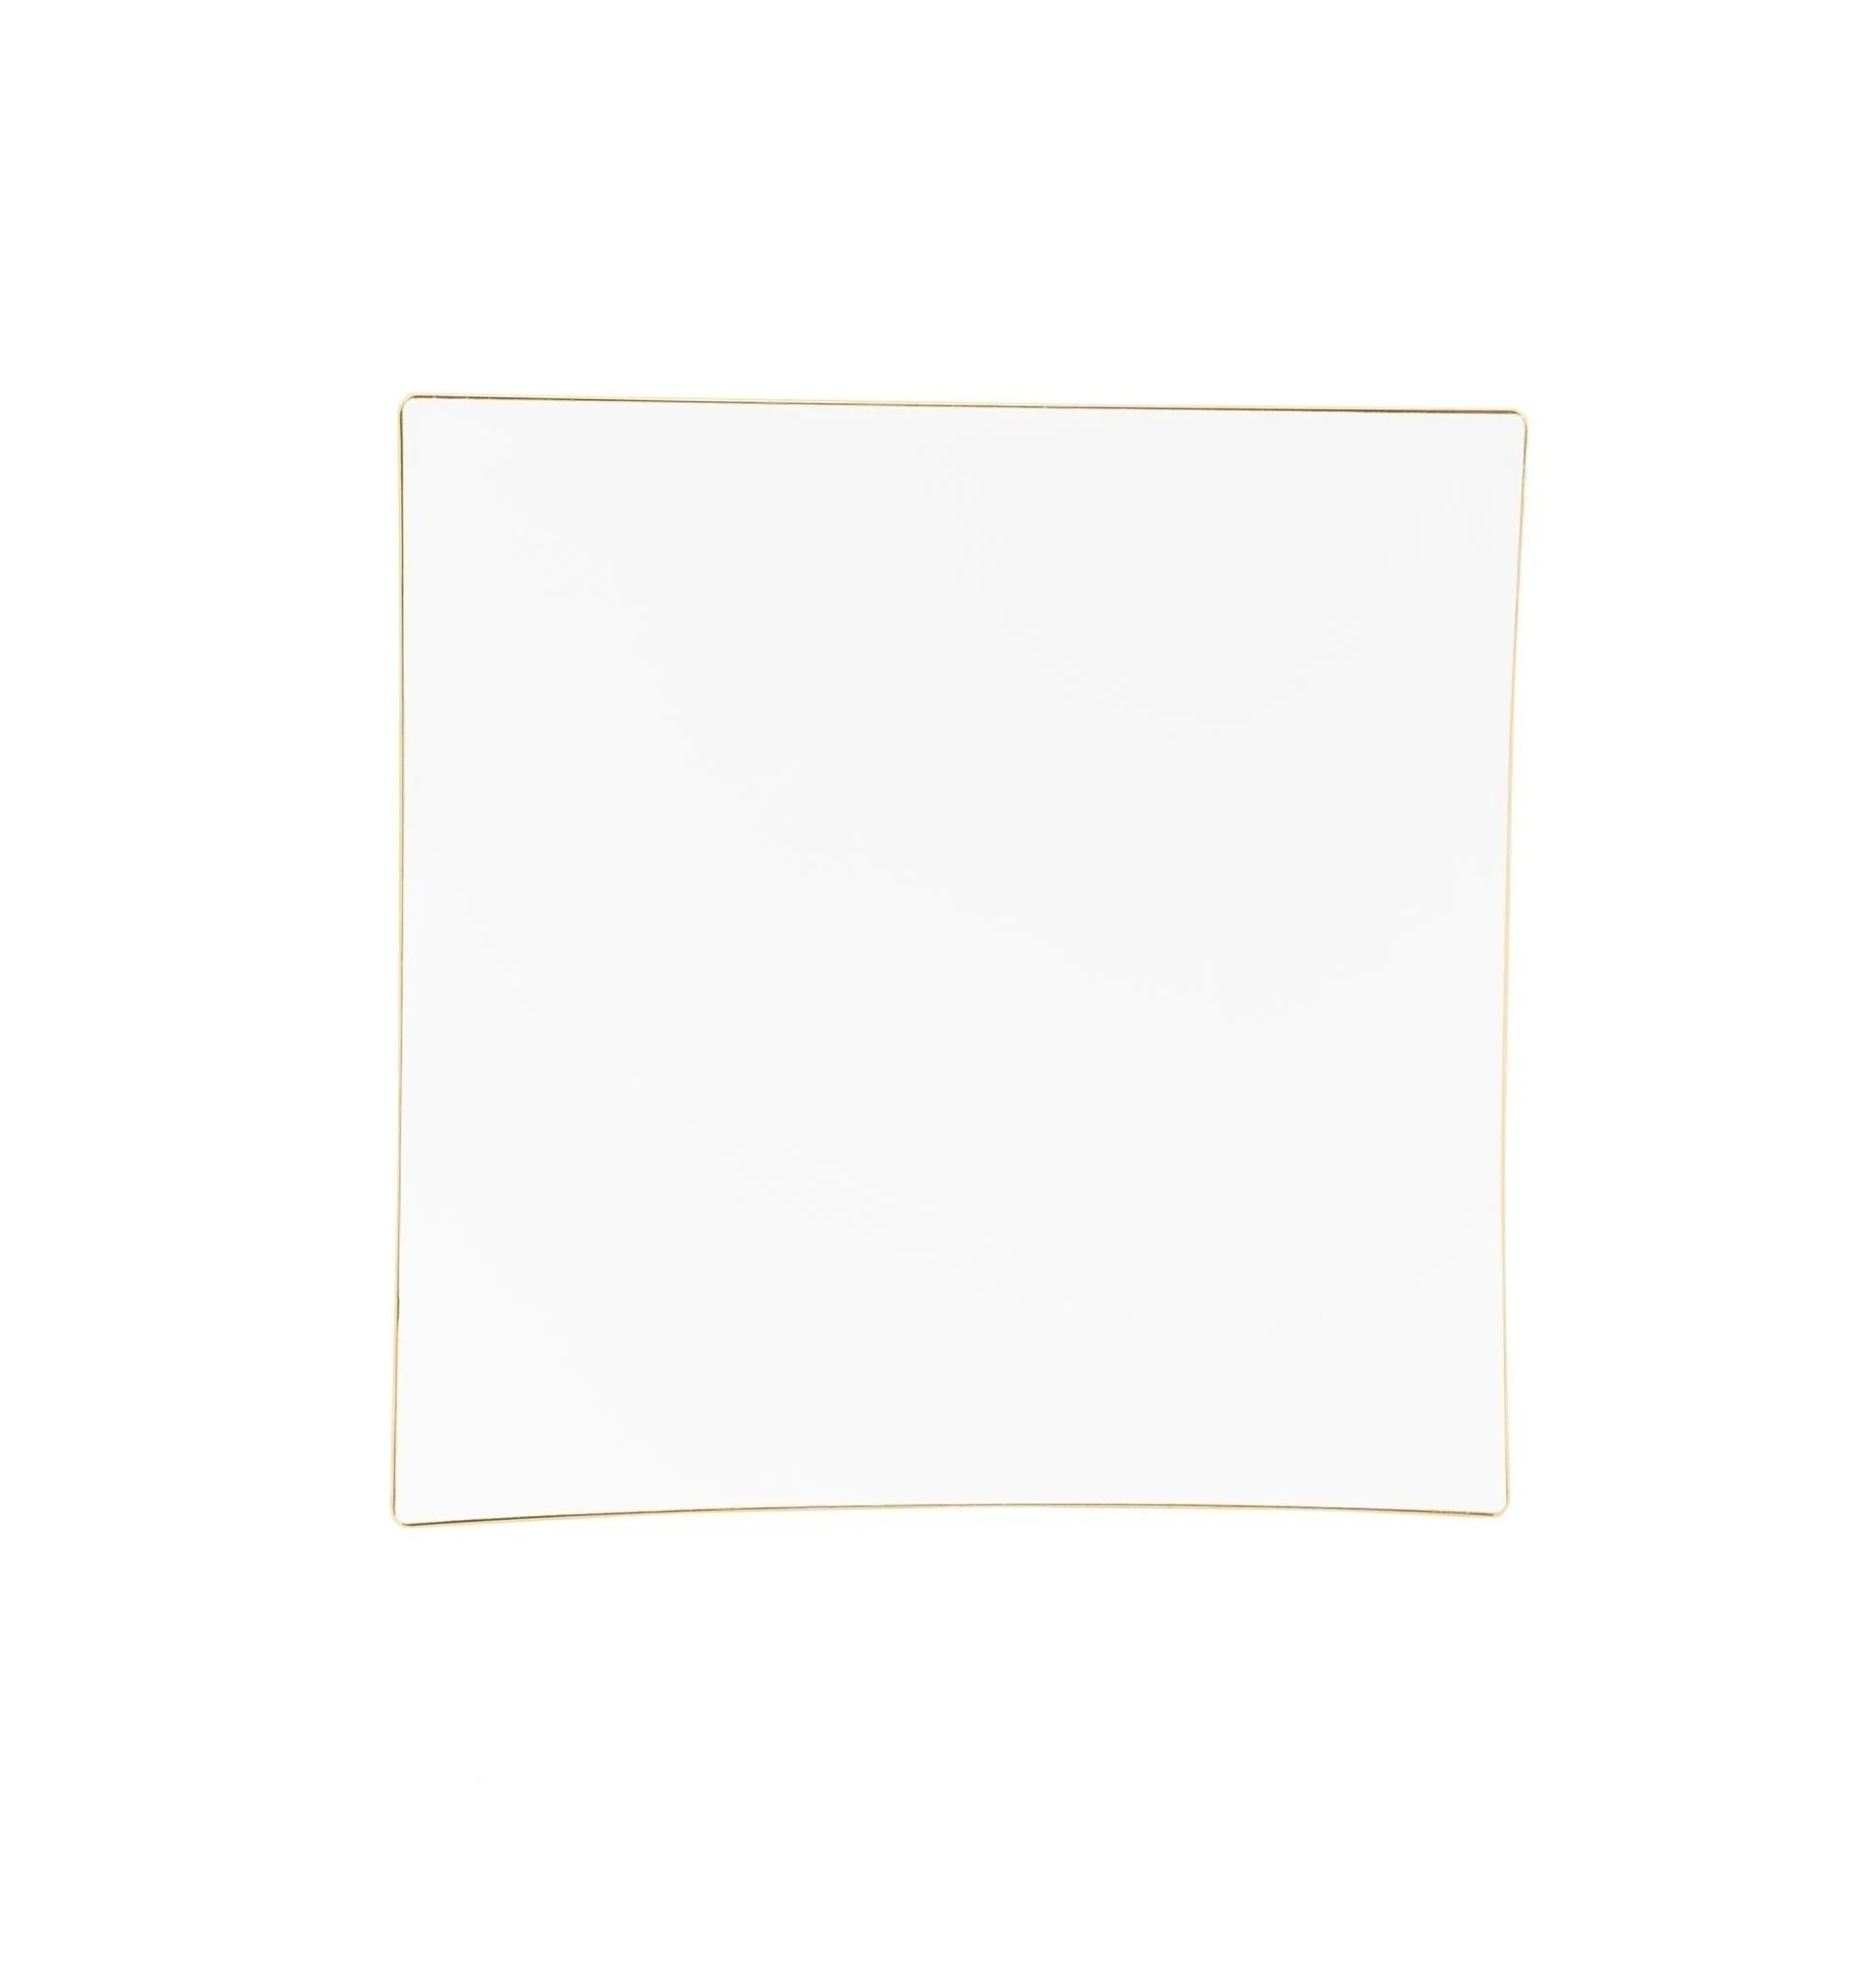 Luxe Party Square White with Gold Trim Plastic Appetizer Plate 8